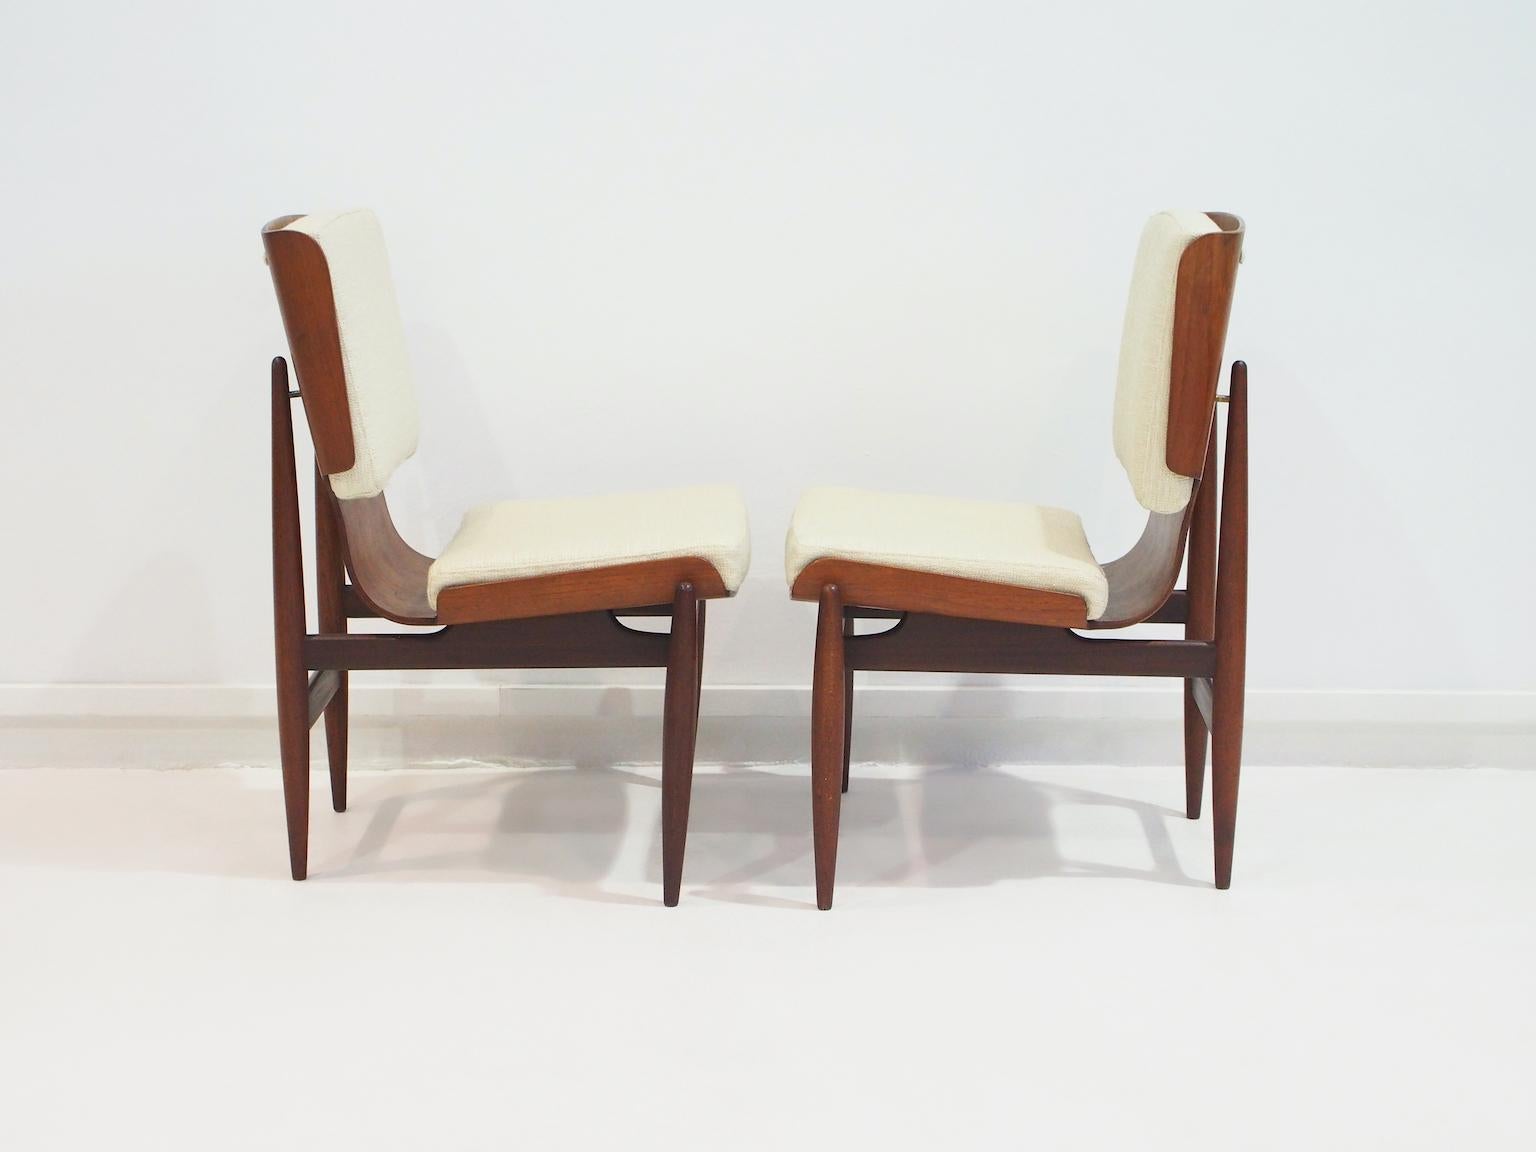 Pair of Italian Modernist Wooden Side Chairs by Barovero For Sale 2